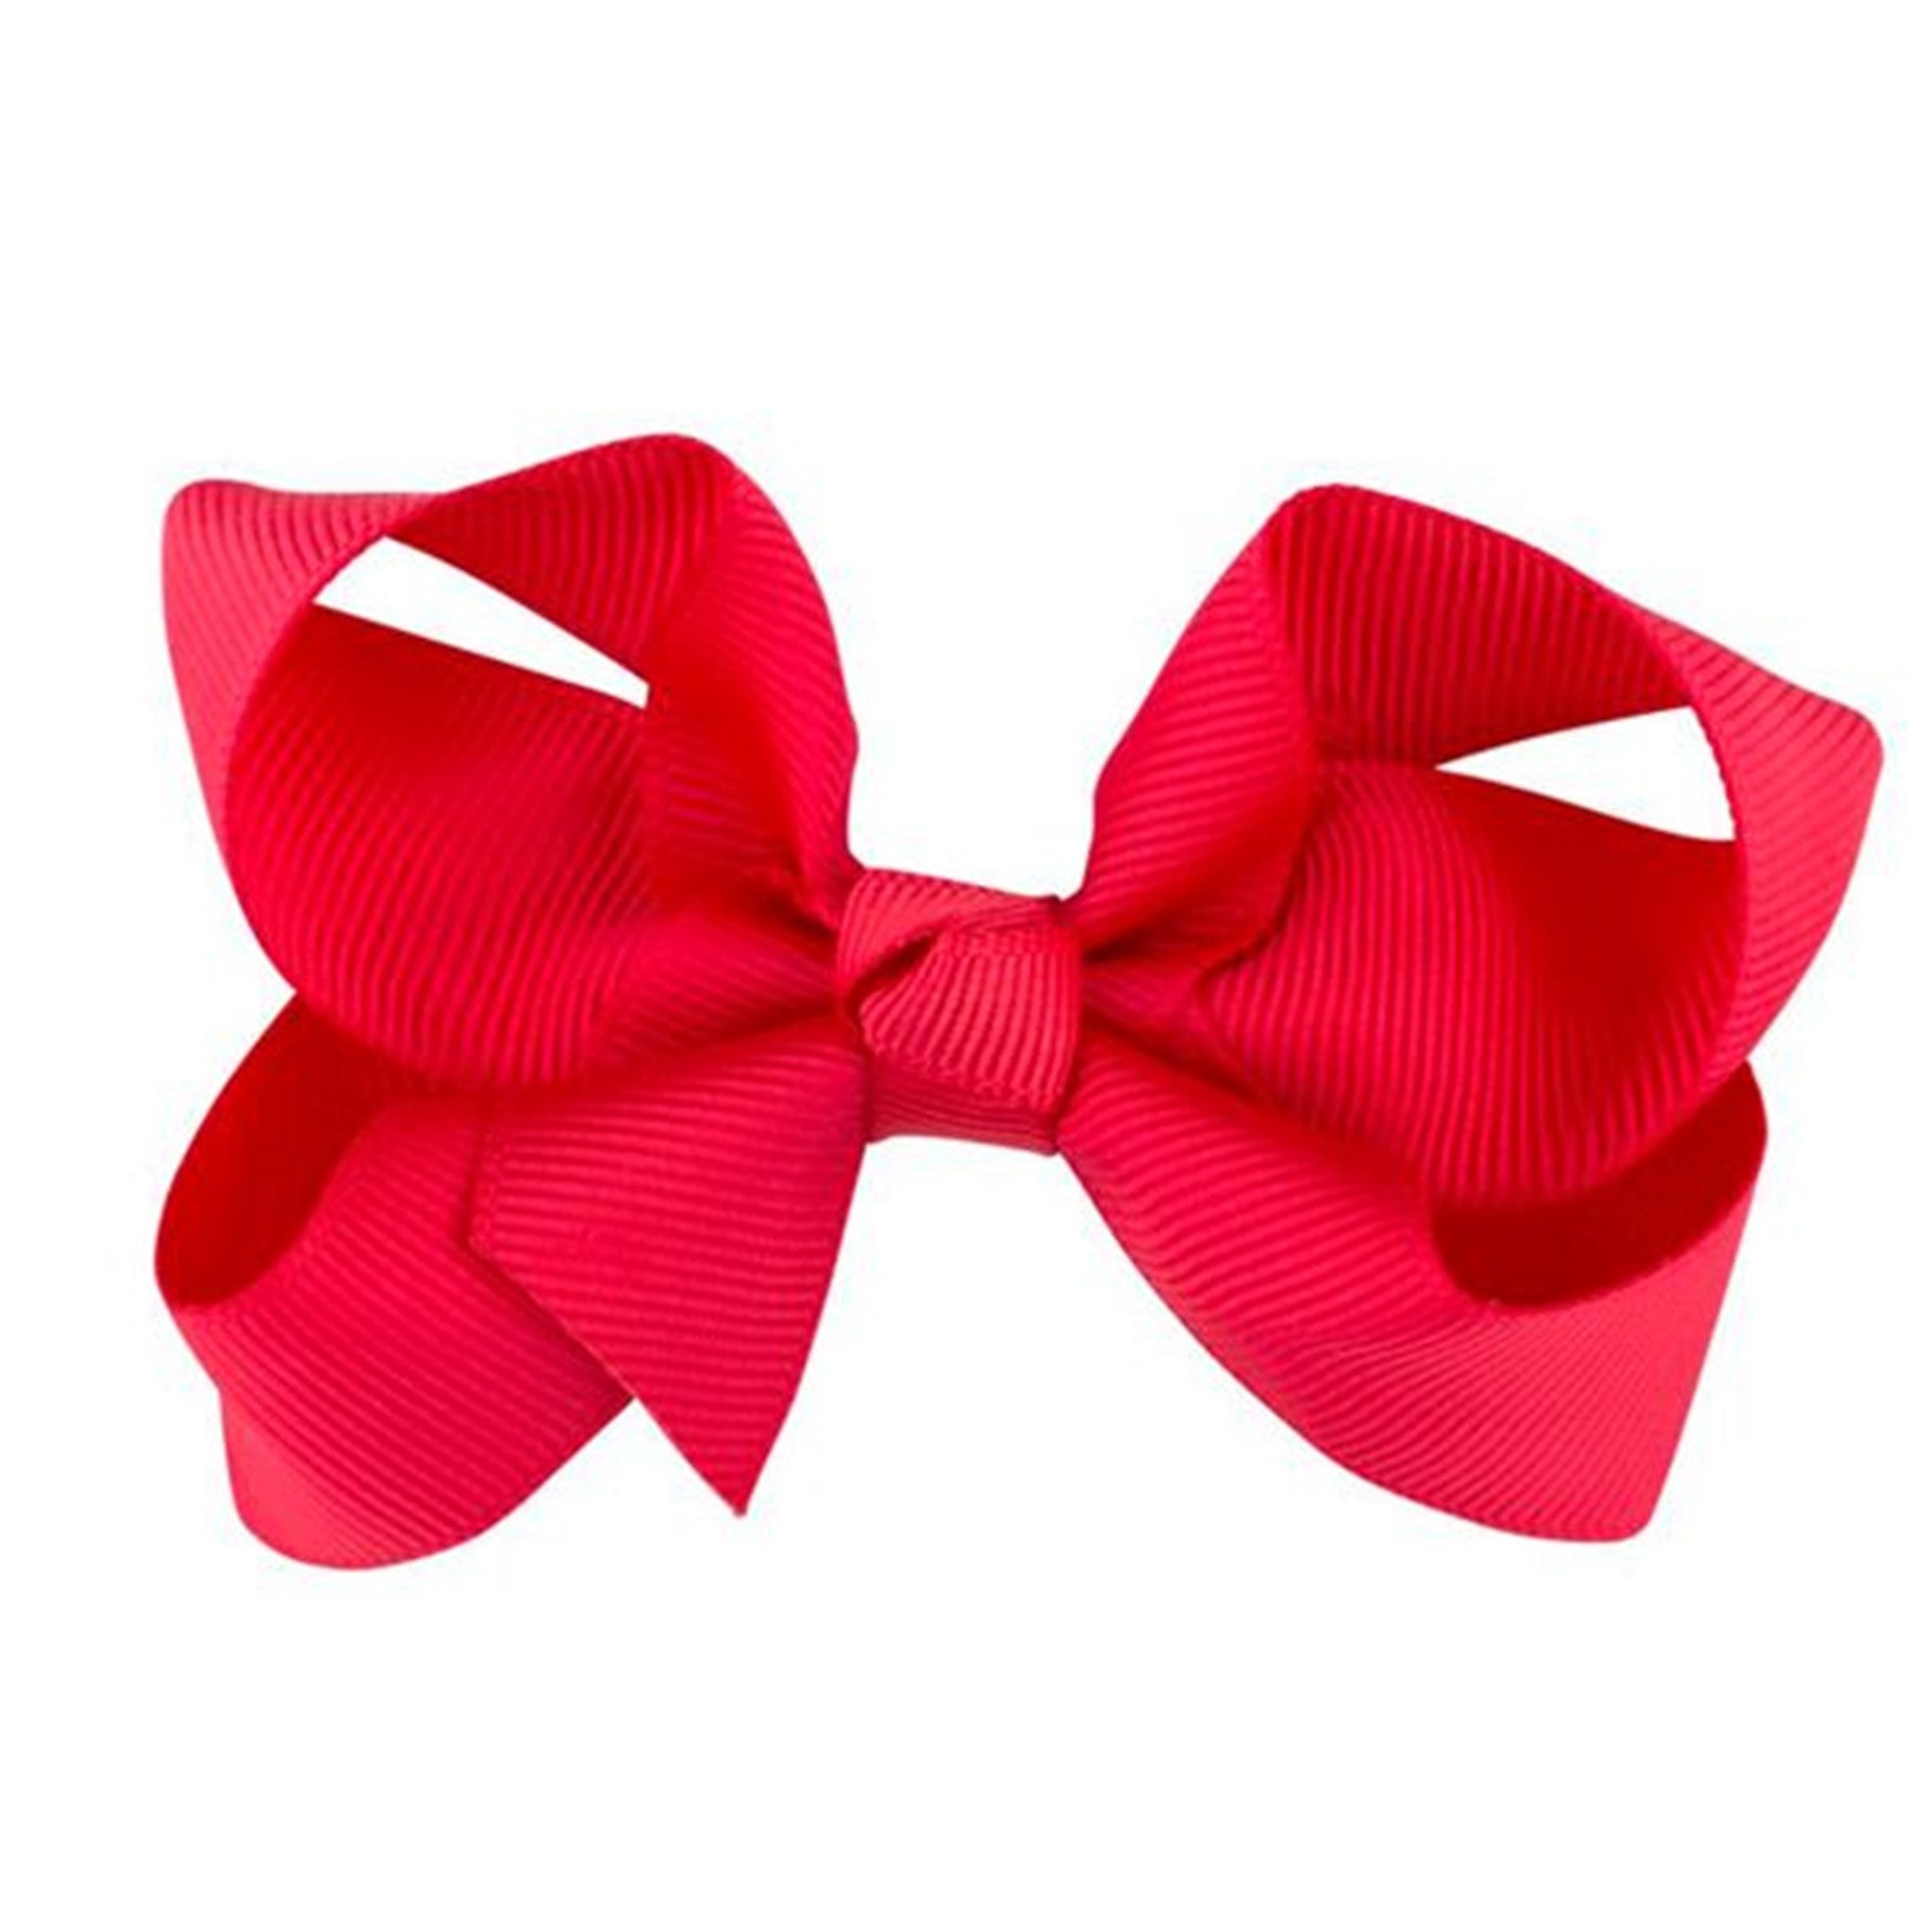 Bow's by Stær Bow (red)